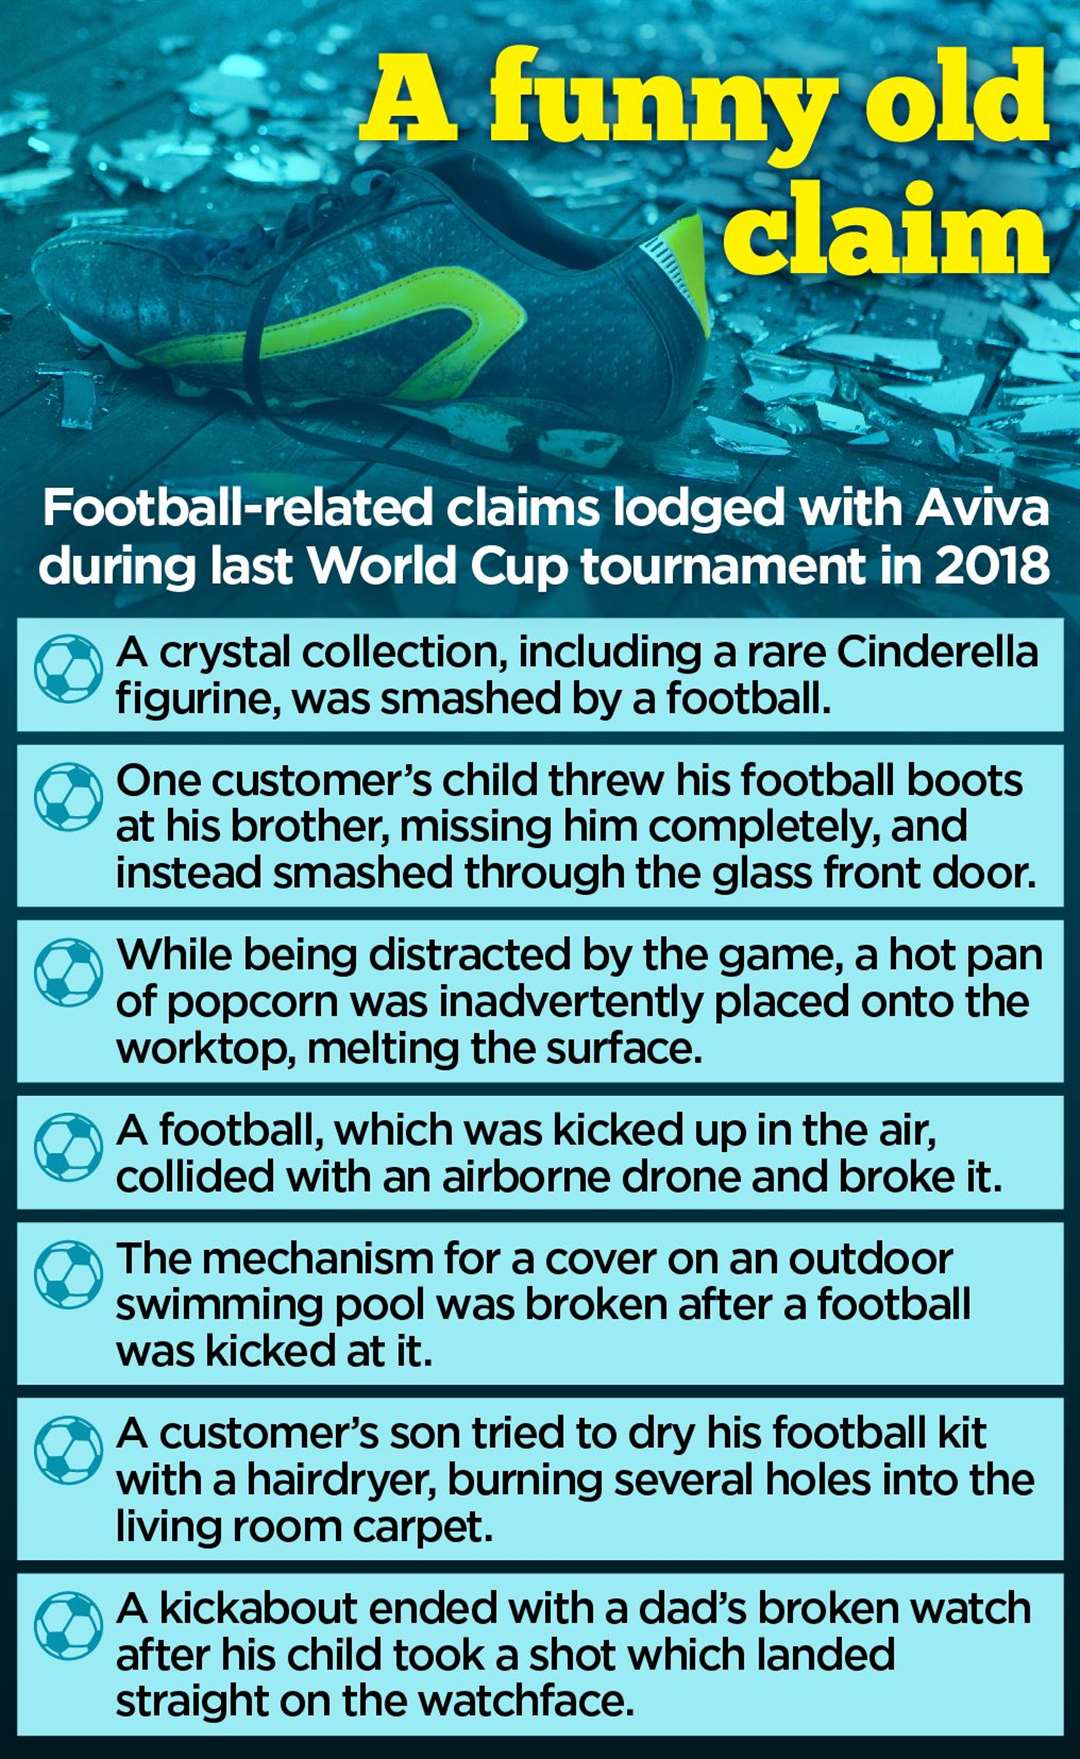 Football-related claims received by Aviva during the last World Cup